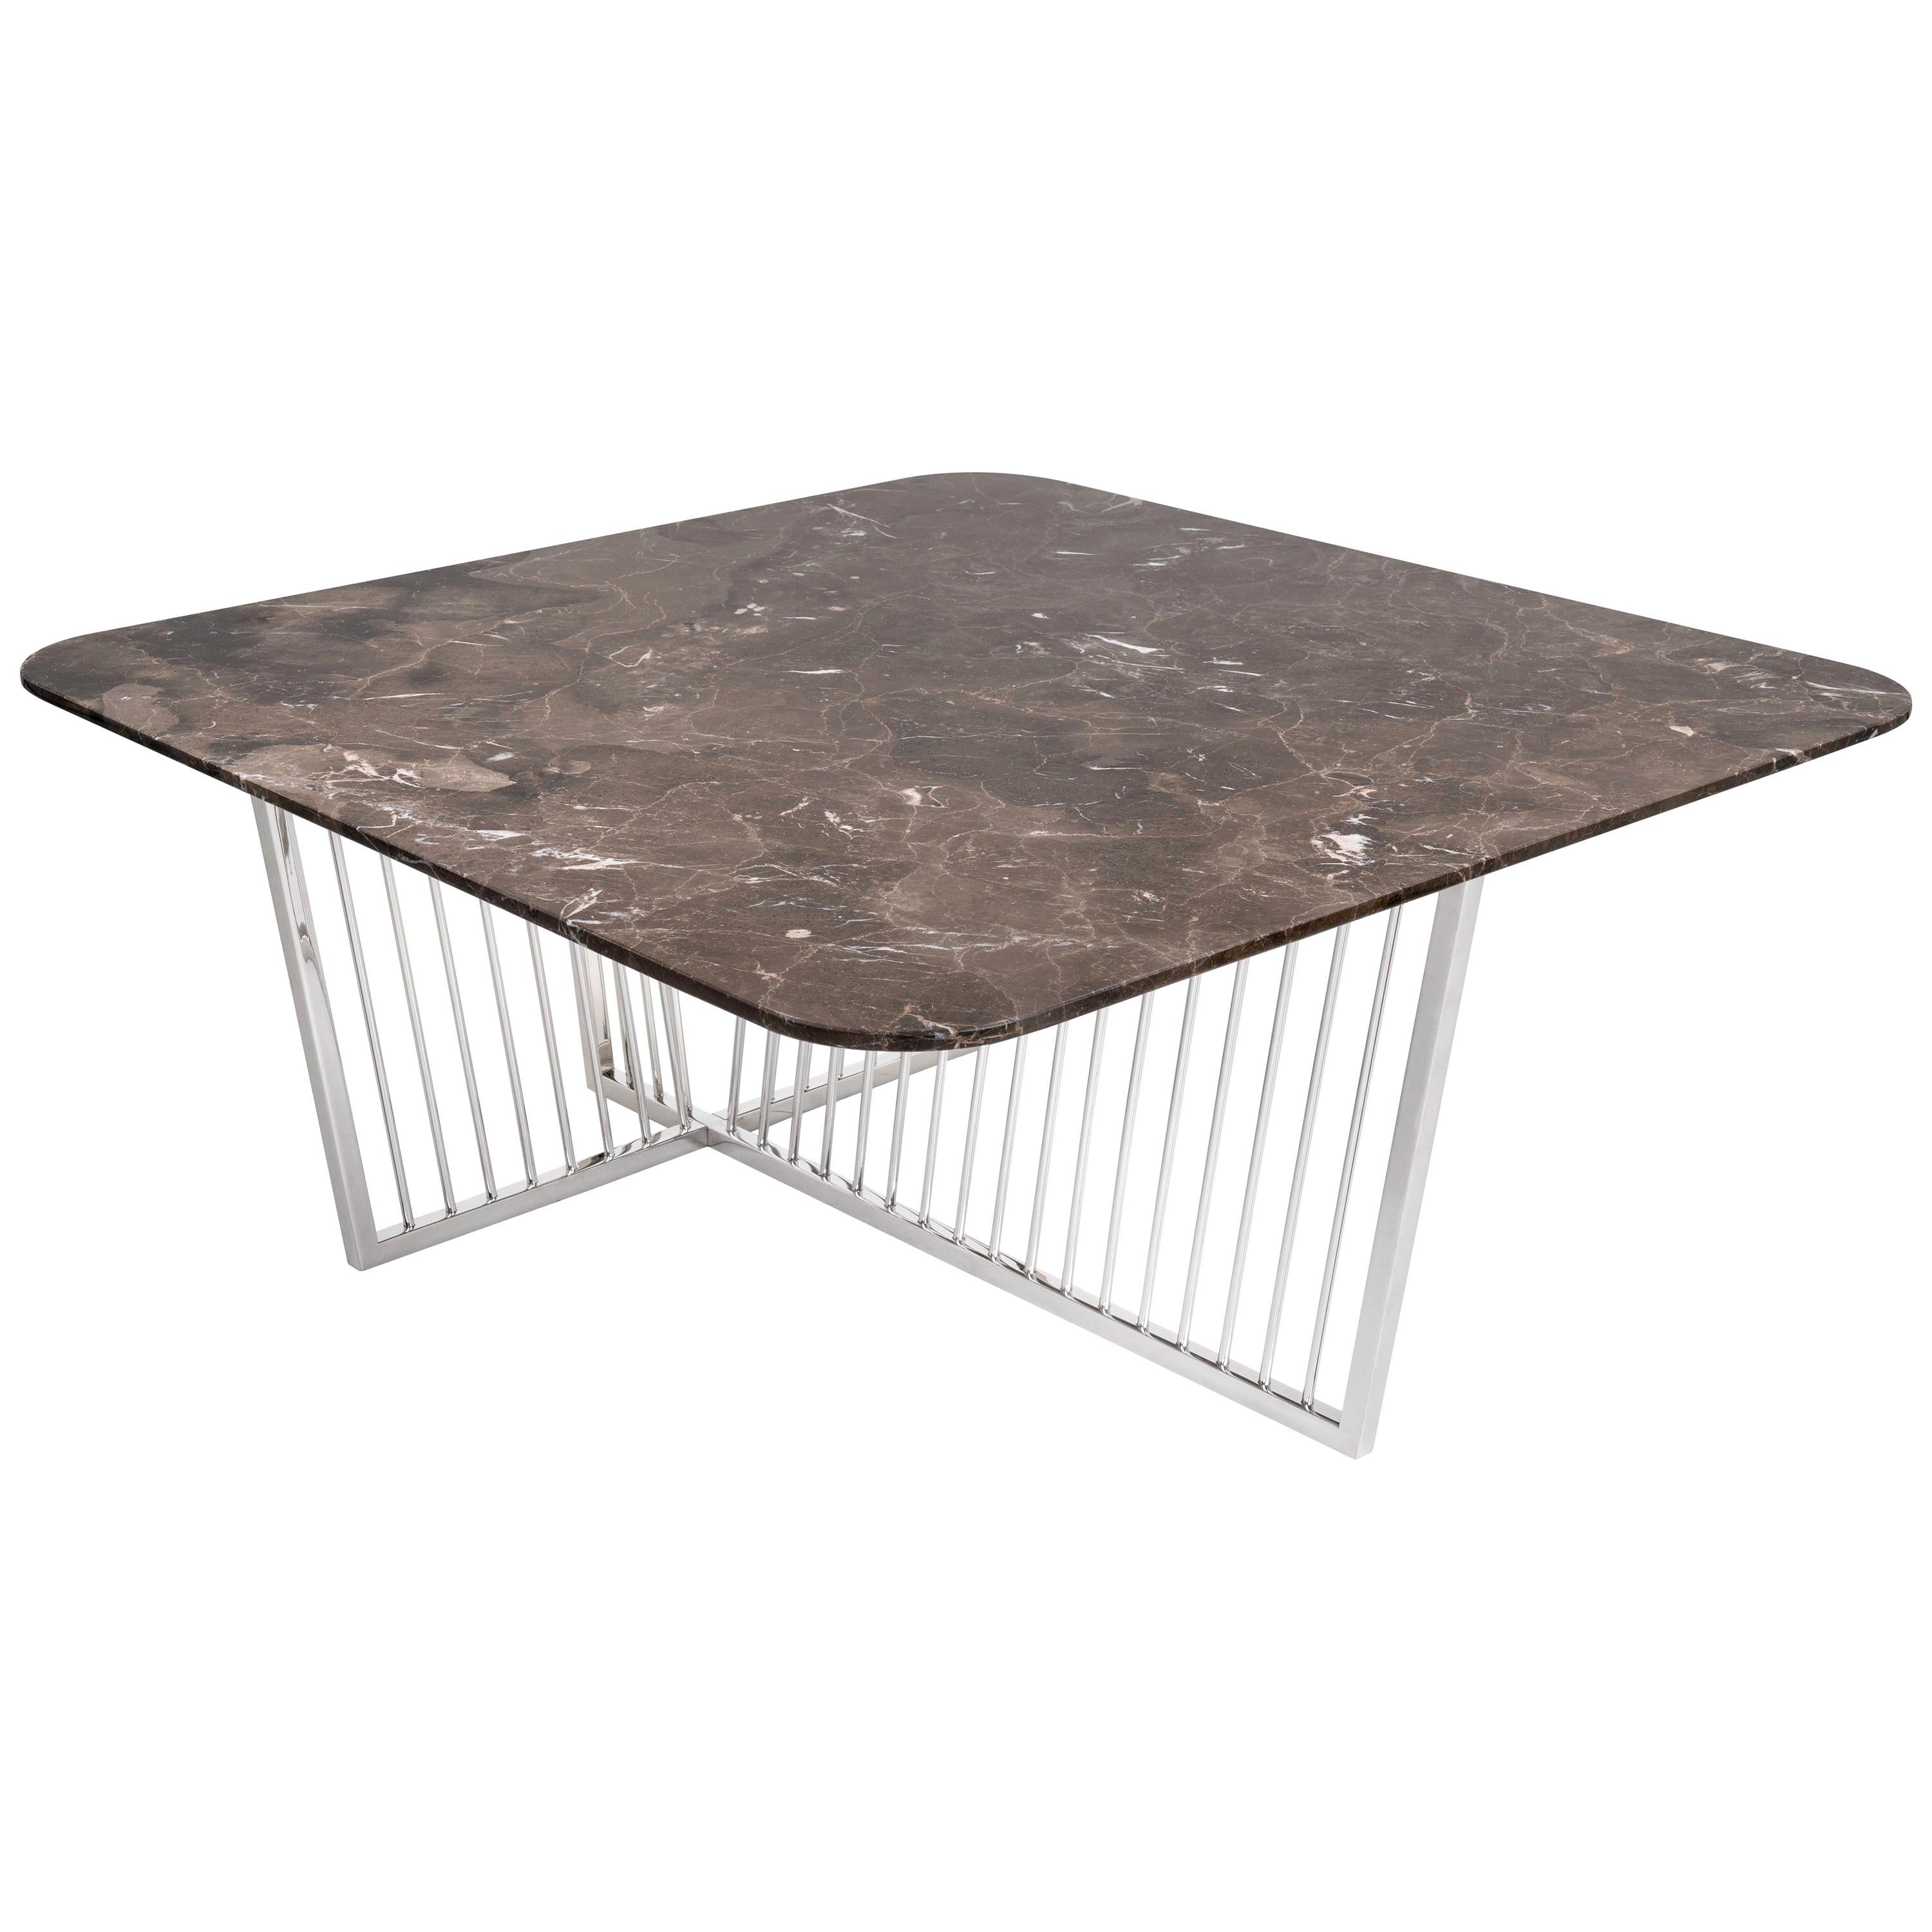 Cume SQ Coffee Table with Marble Top and Polished Stainless Steel Base